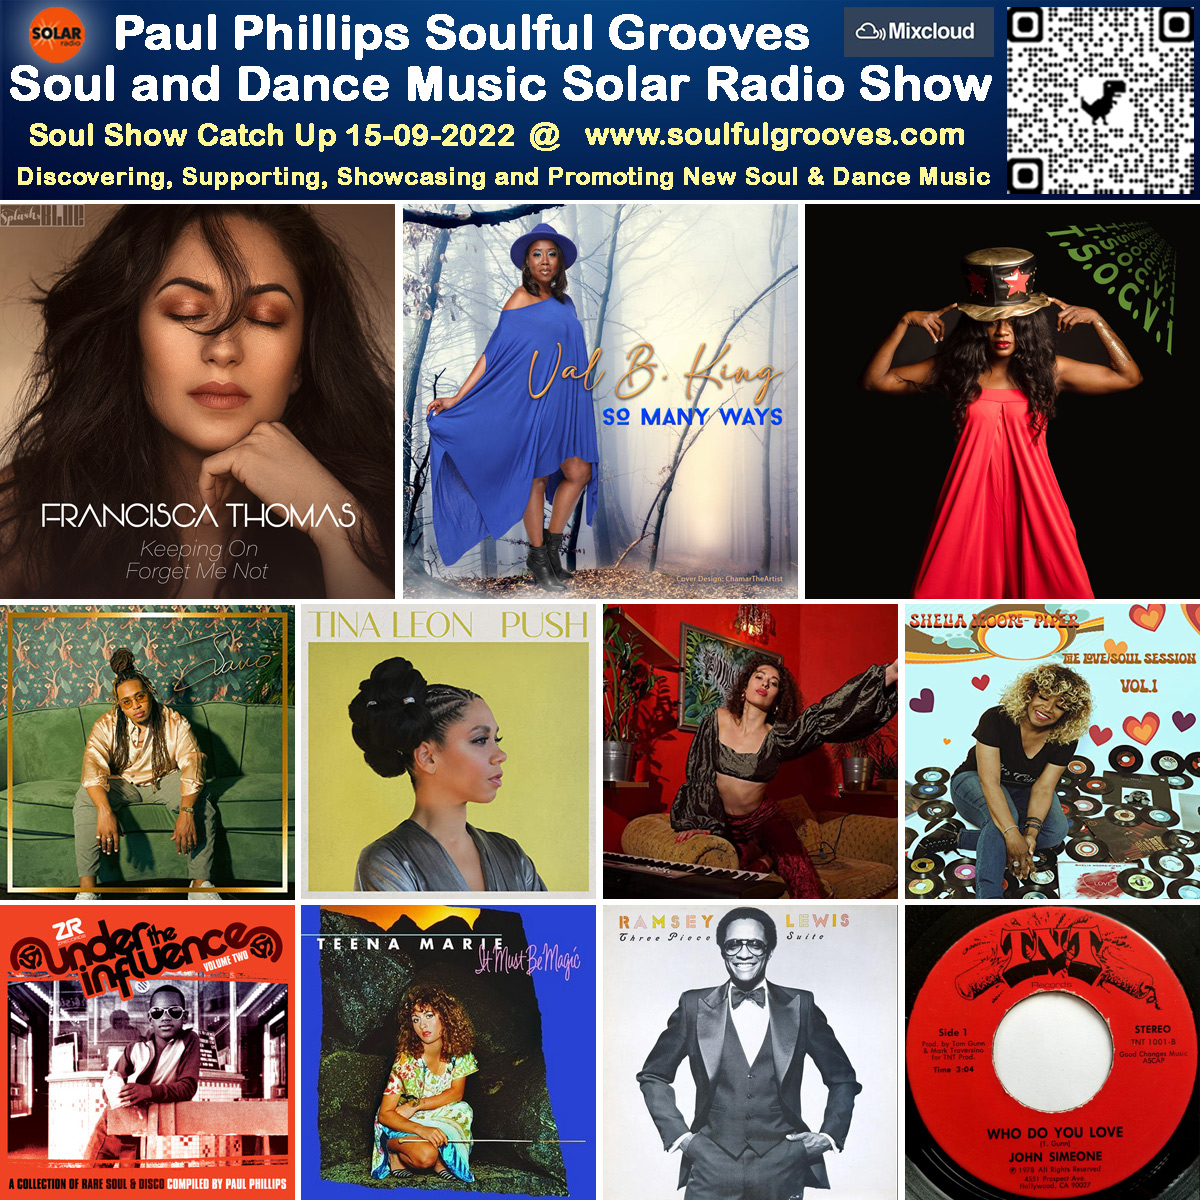 A picture of Paul Phillips radio show playlist of new and classic soulful house, deep house, nu disco, soul, funk, jazz, disco, 80s boogie music